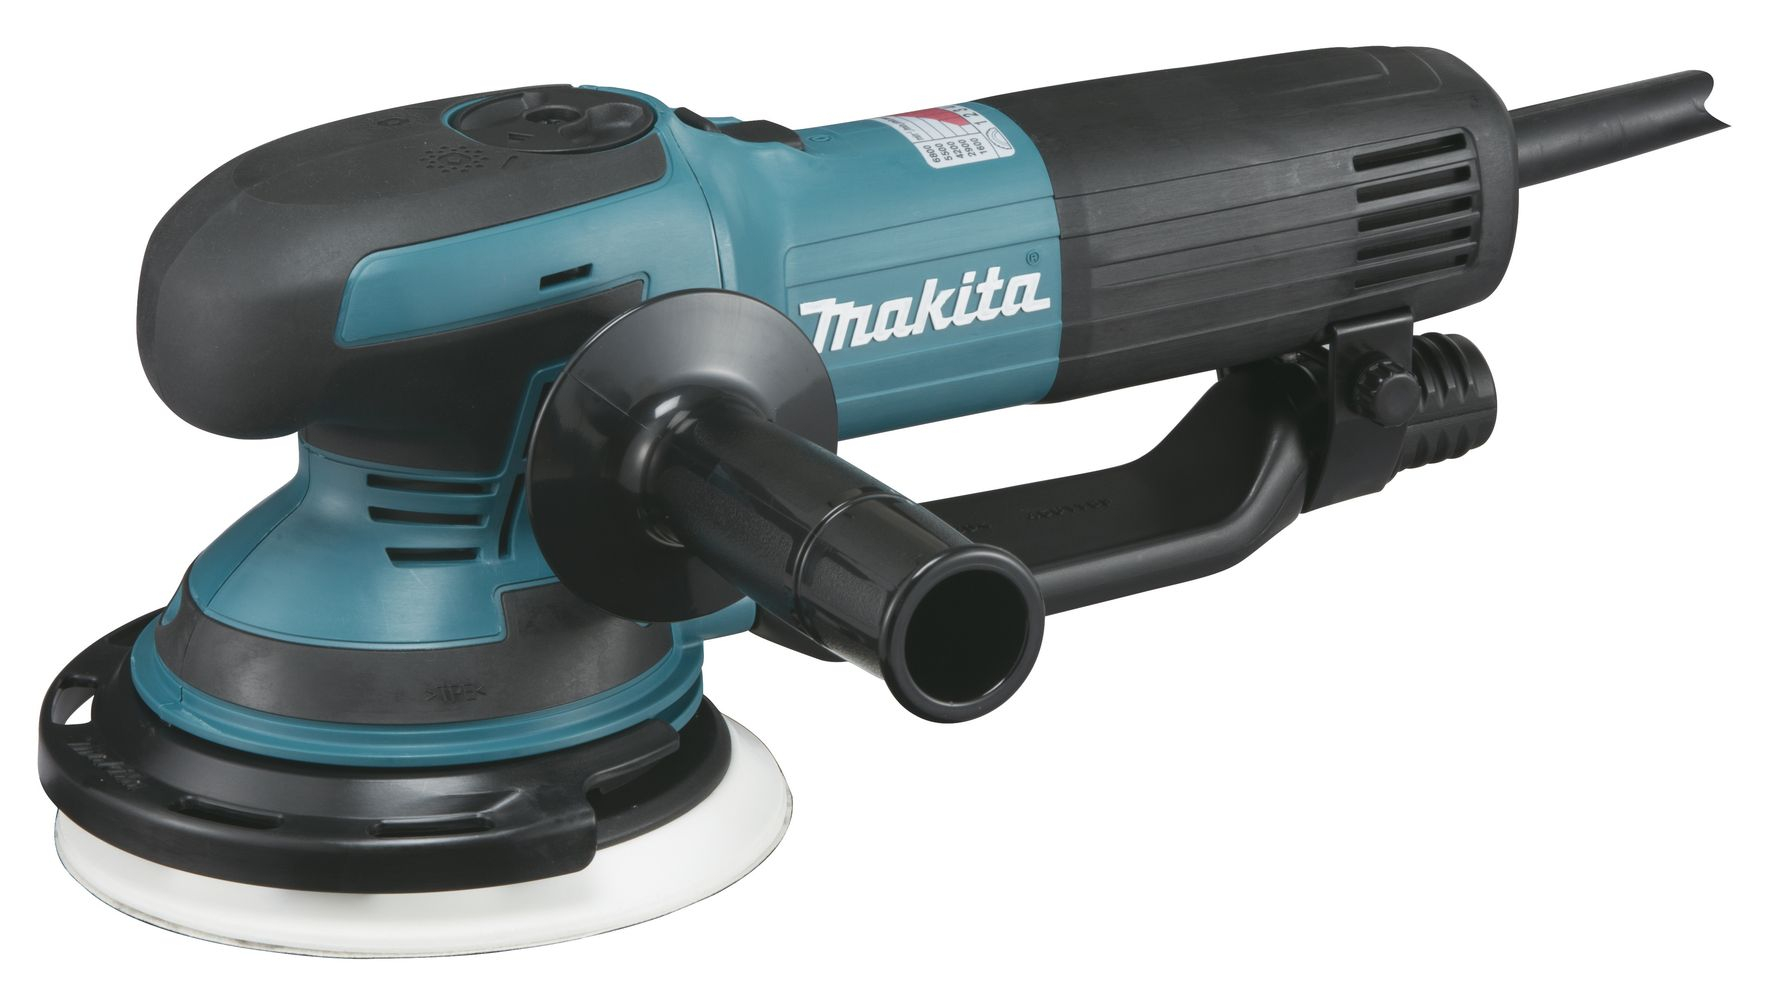 ponceuse-polisseuse-excent-750w-d150mm-bo6050j-makita-0